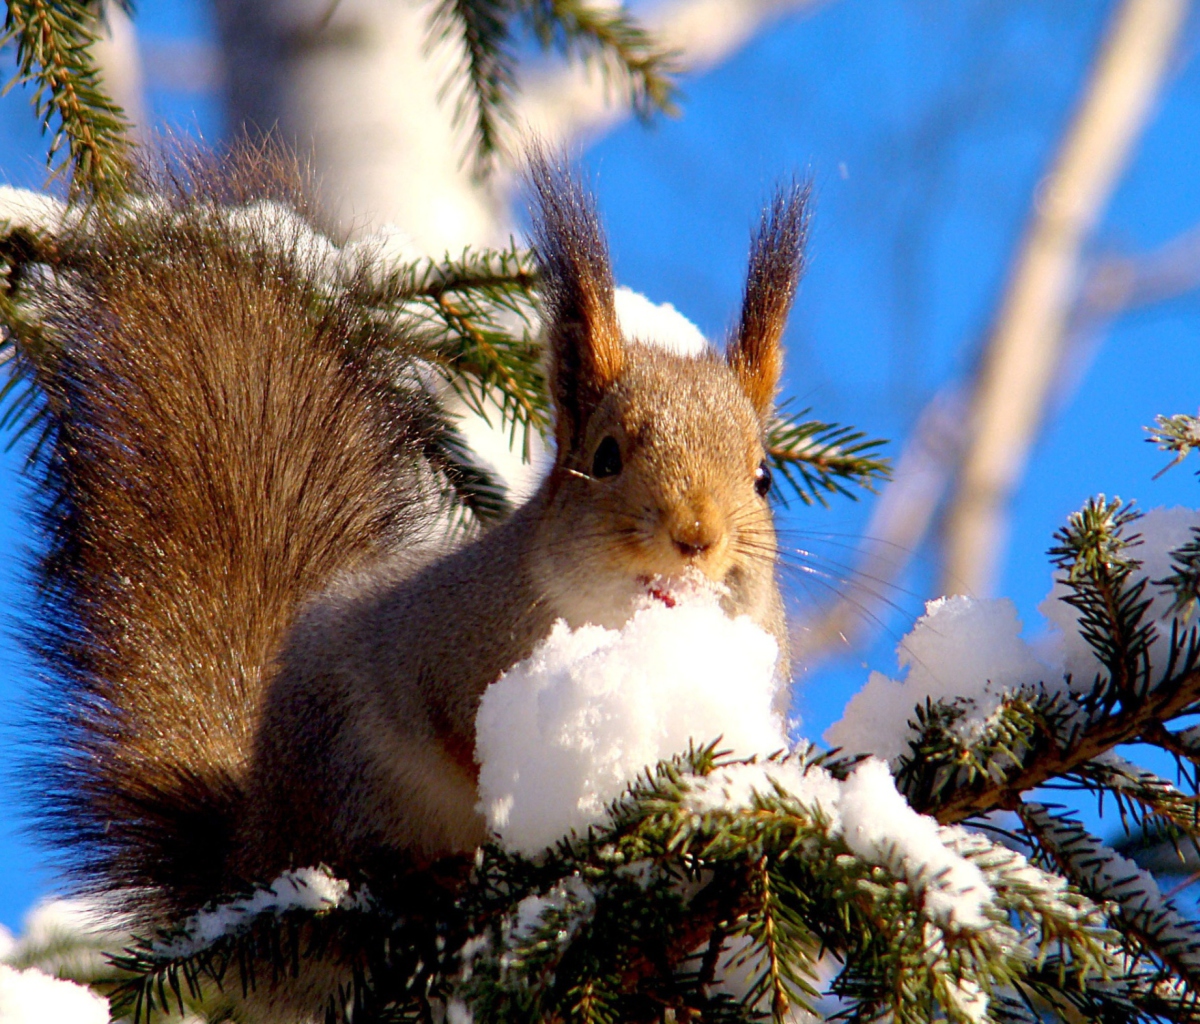 Squirrel Eating Snow wallpaper 1200x1024